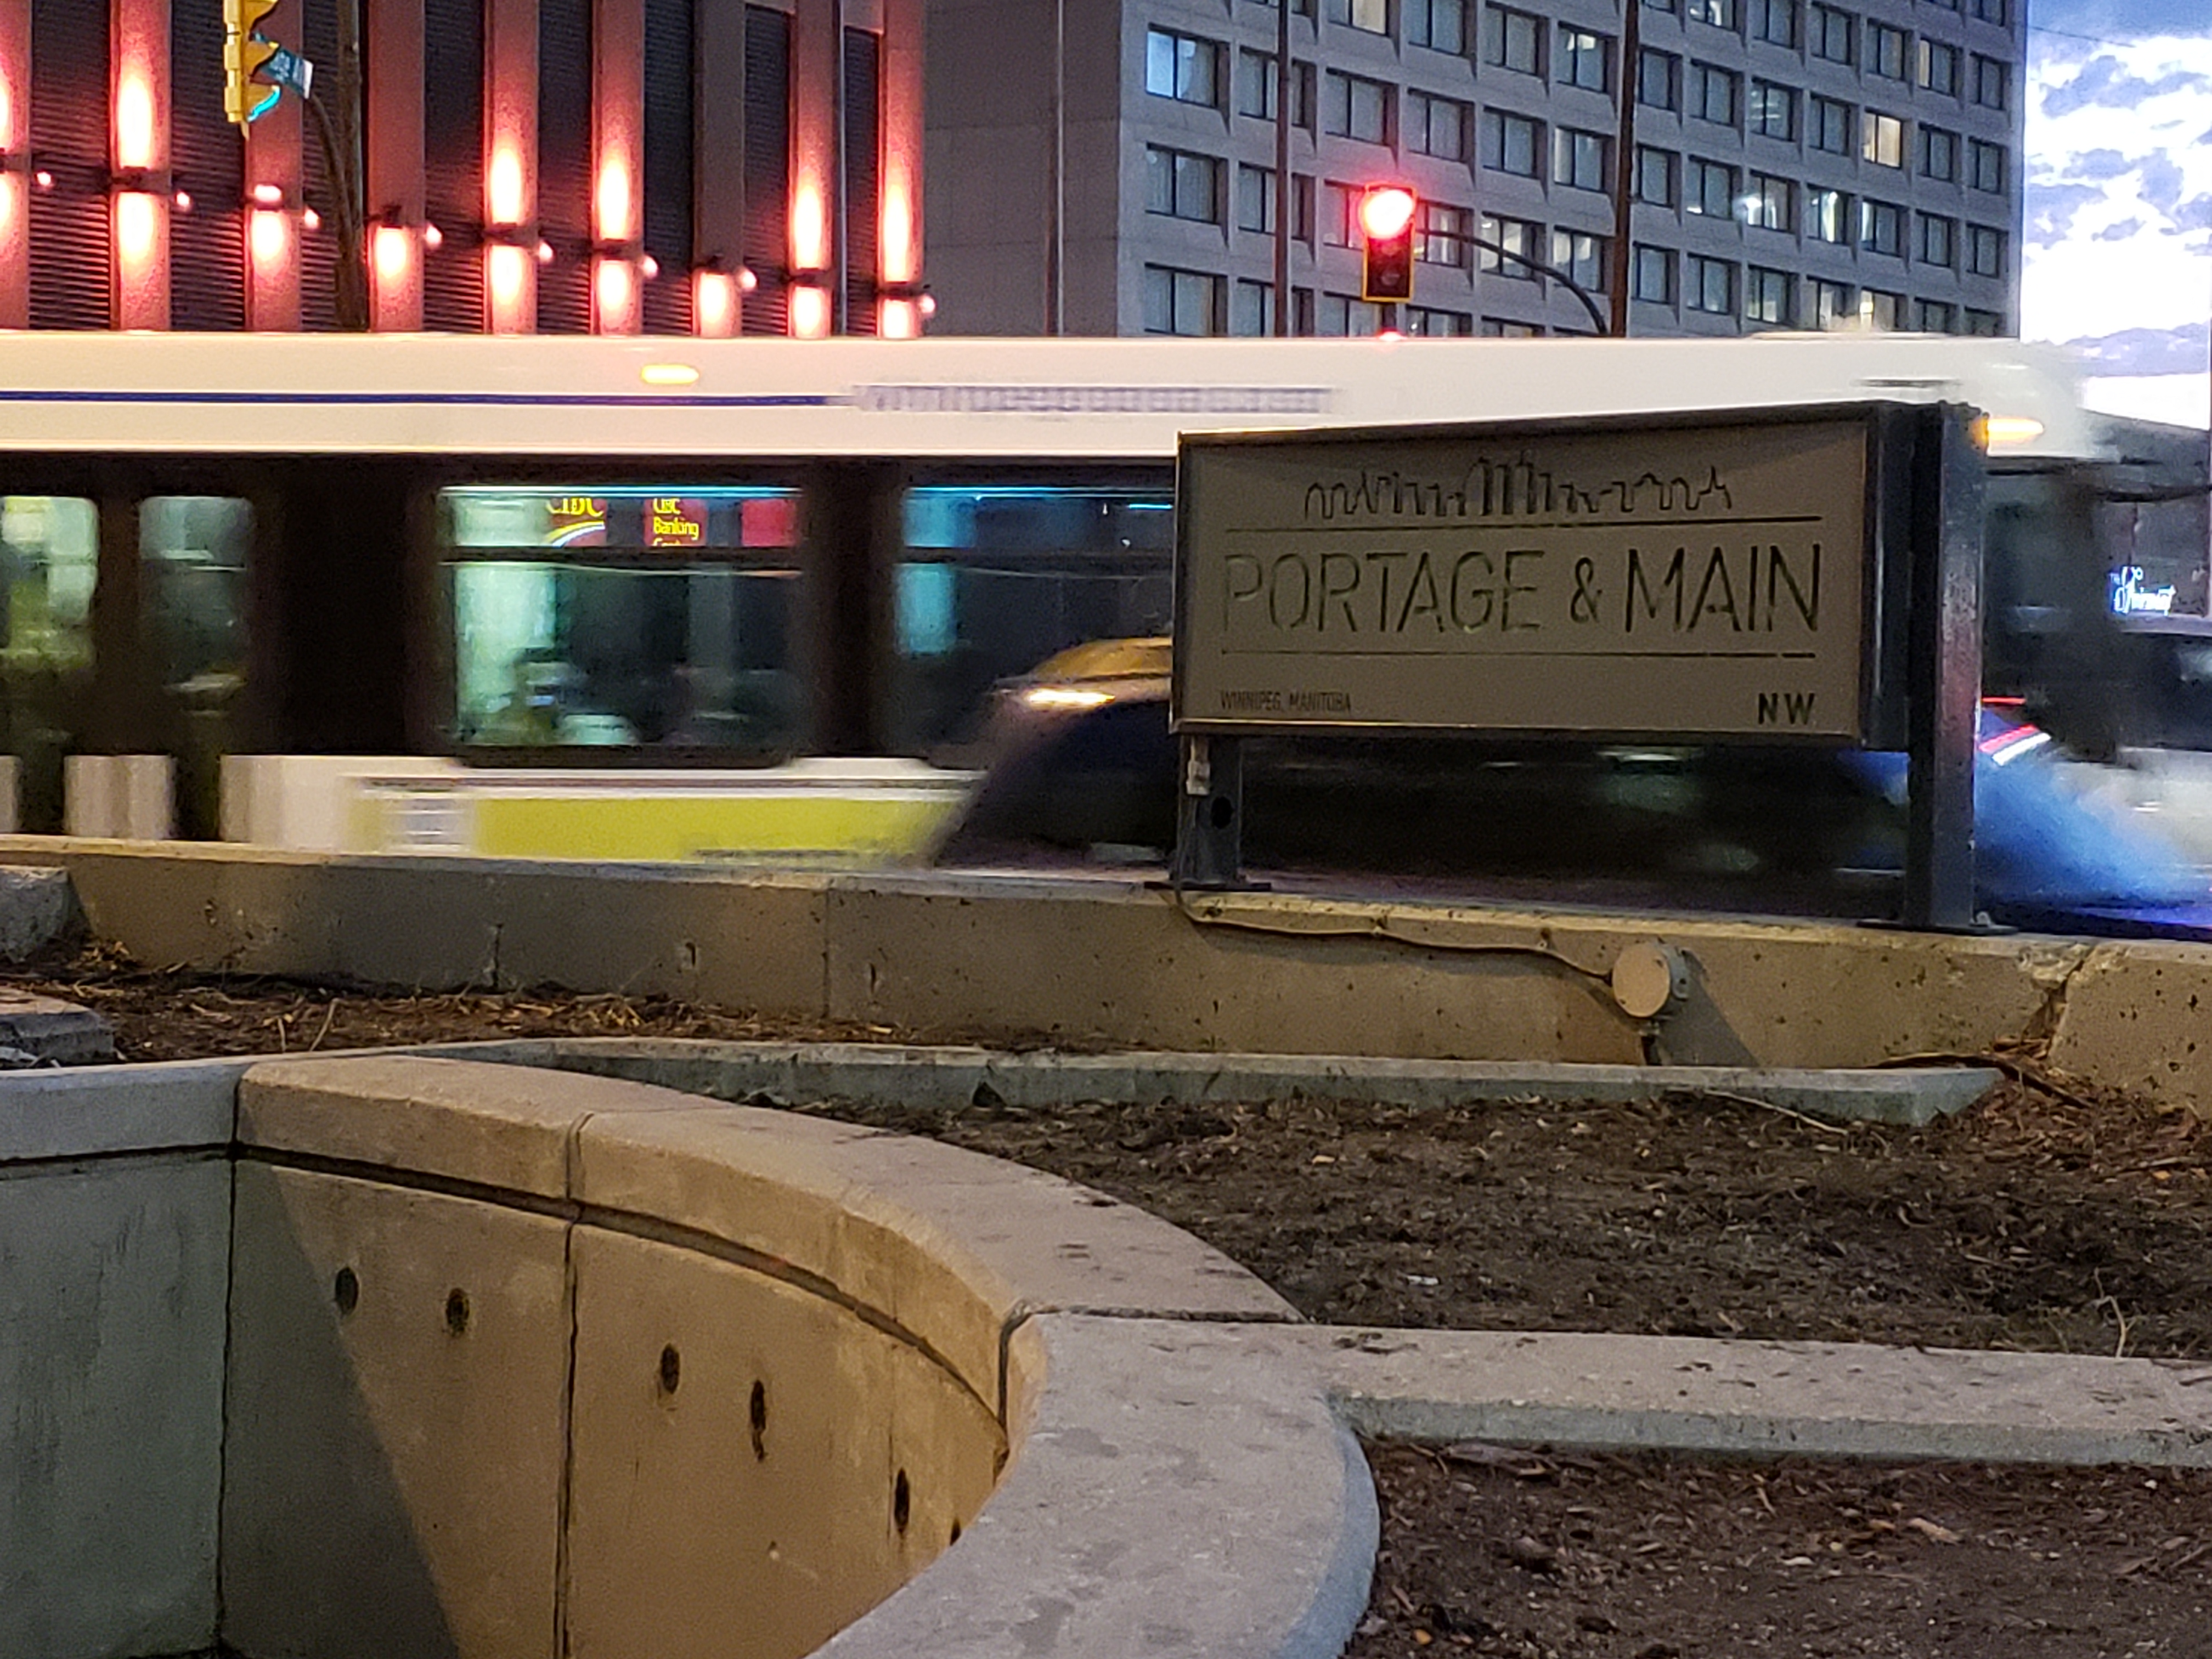 Stakeholders react to Winnipeg’s city council voting to open Portage and Main to pedestrians